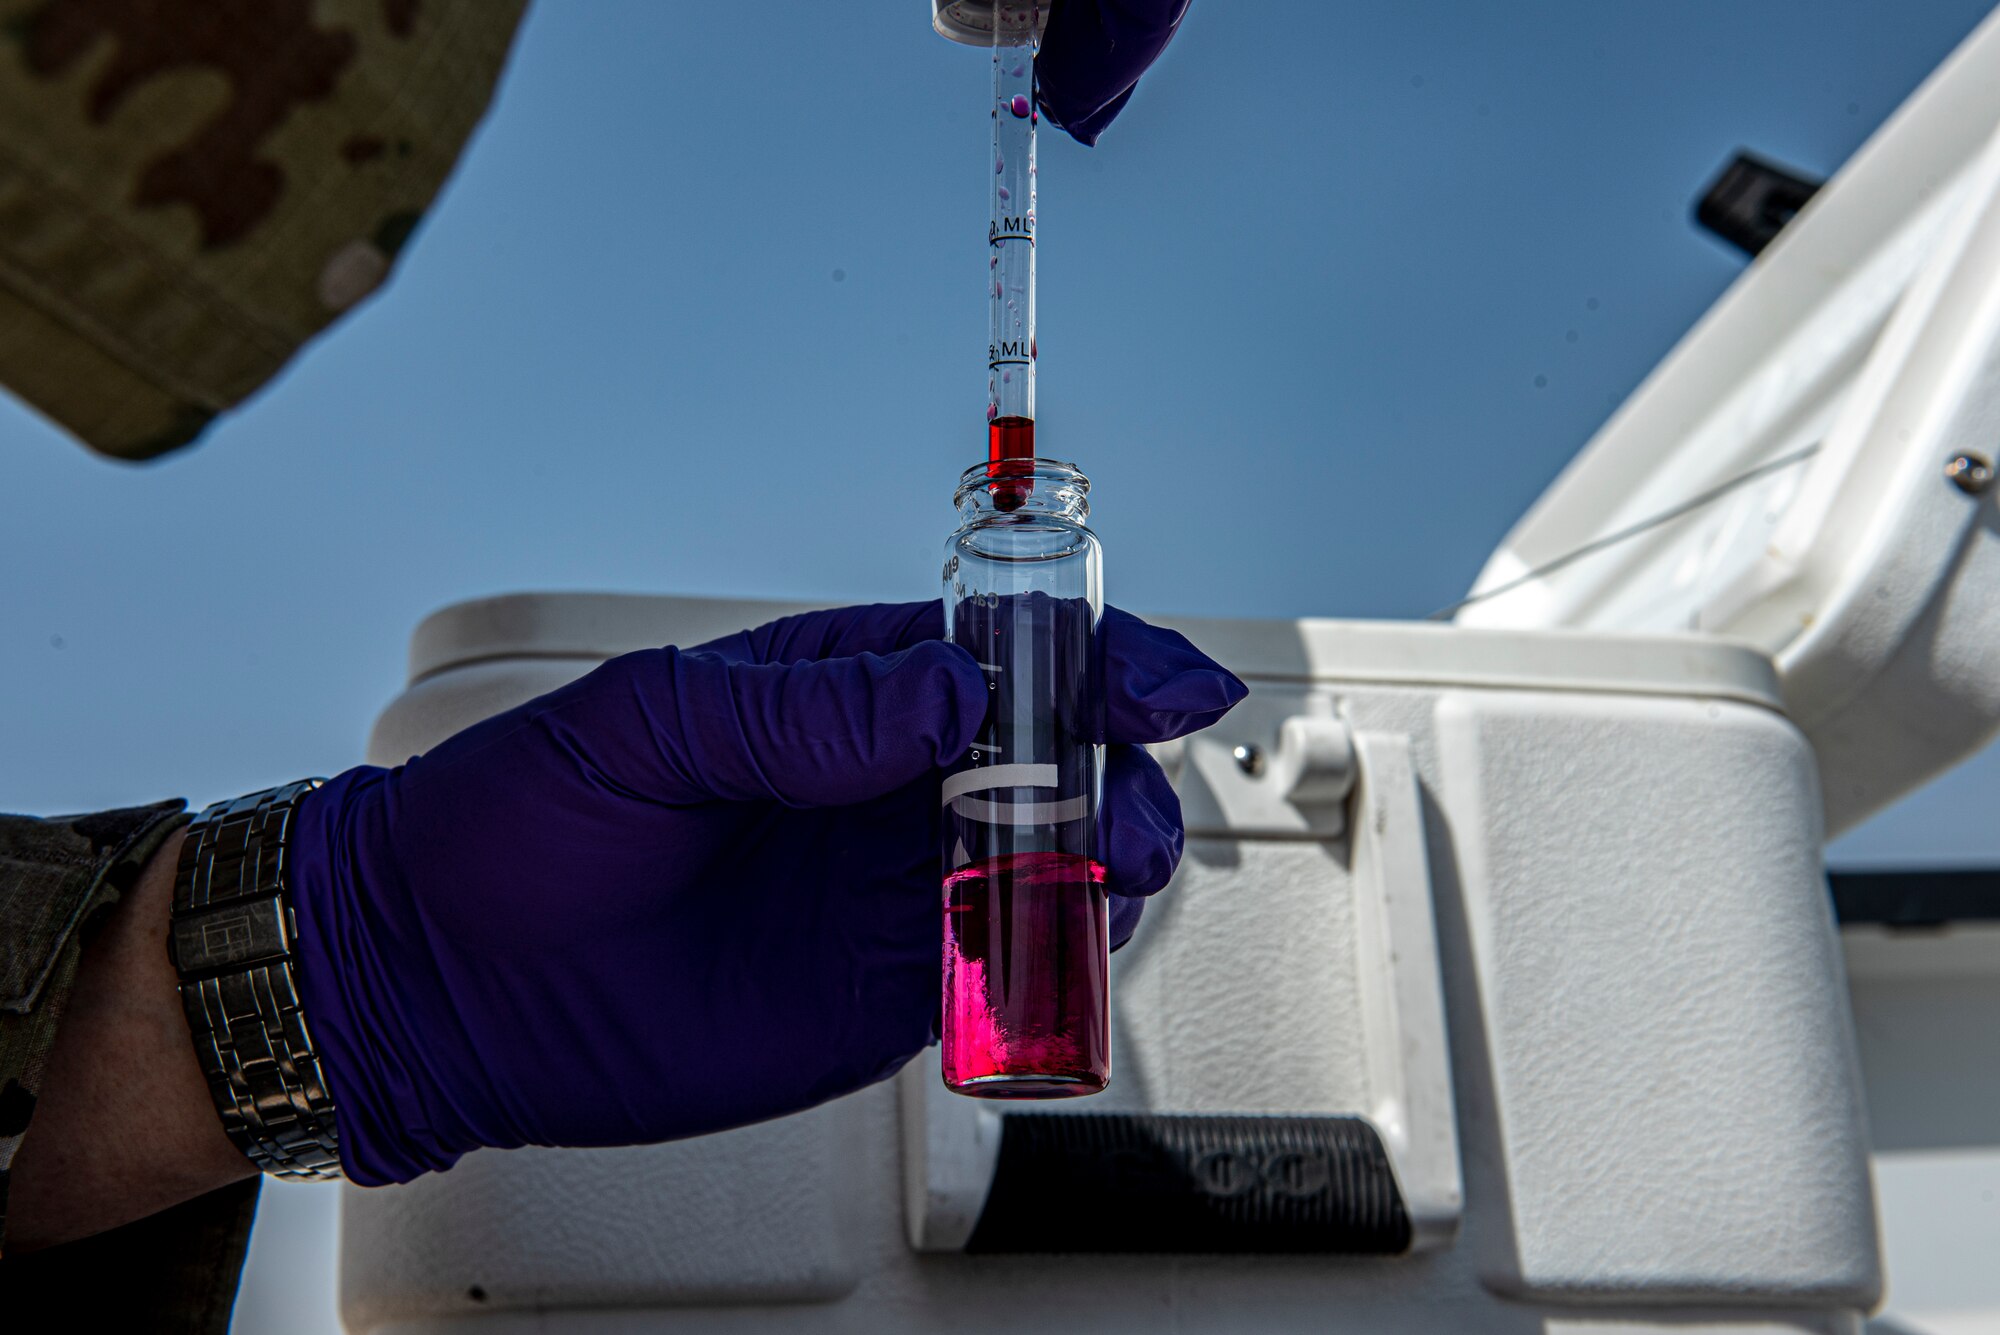 Senior Airman Matthew Ketterling, 379th Expeditionary Medical Operations Squadron bioenvironmental engineering journeyman, pours a Chlorine Reagent into a water sample June 16, 2021, at Al Udeid Air Base, Qatar.